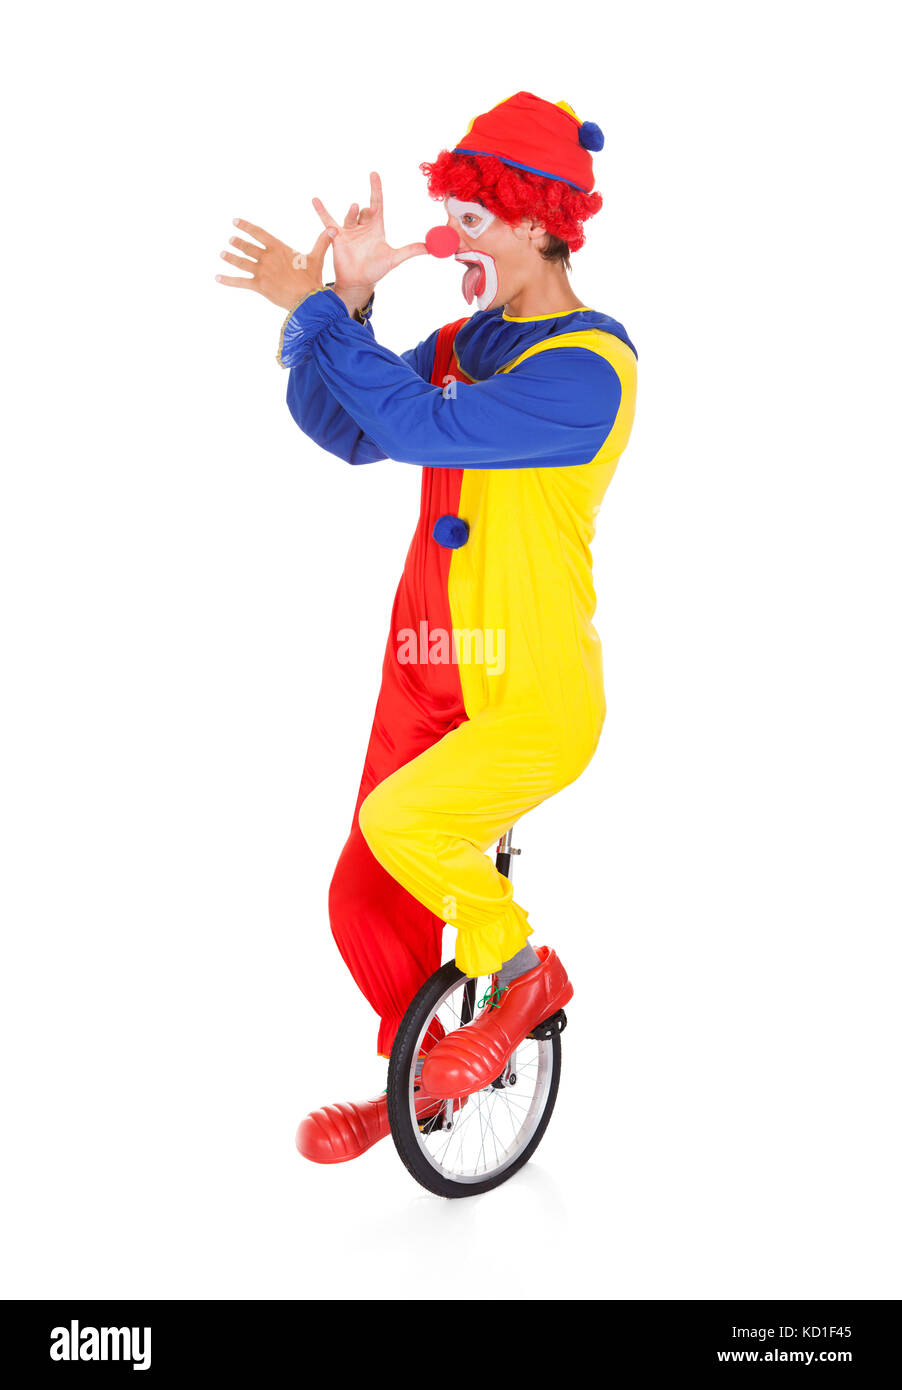 Portrait Of A Funny Clown Performing On Unicycle Over White Background Stock Photo